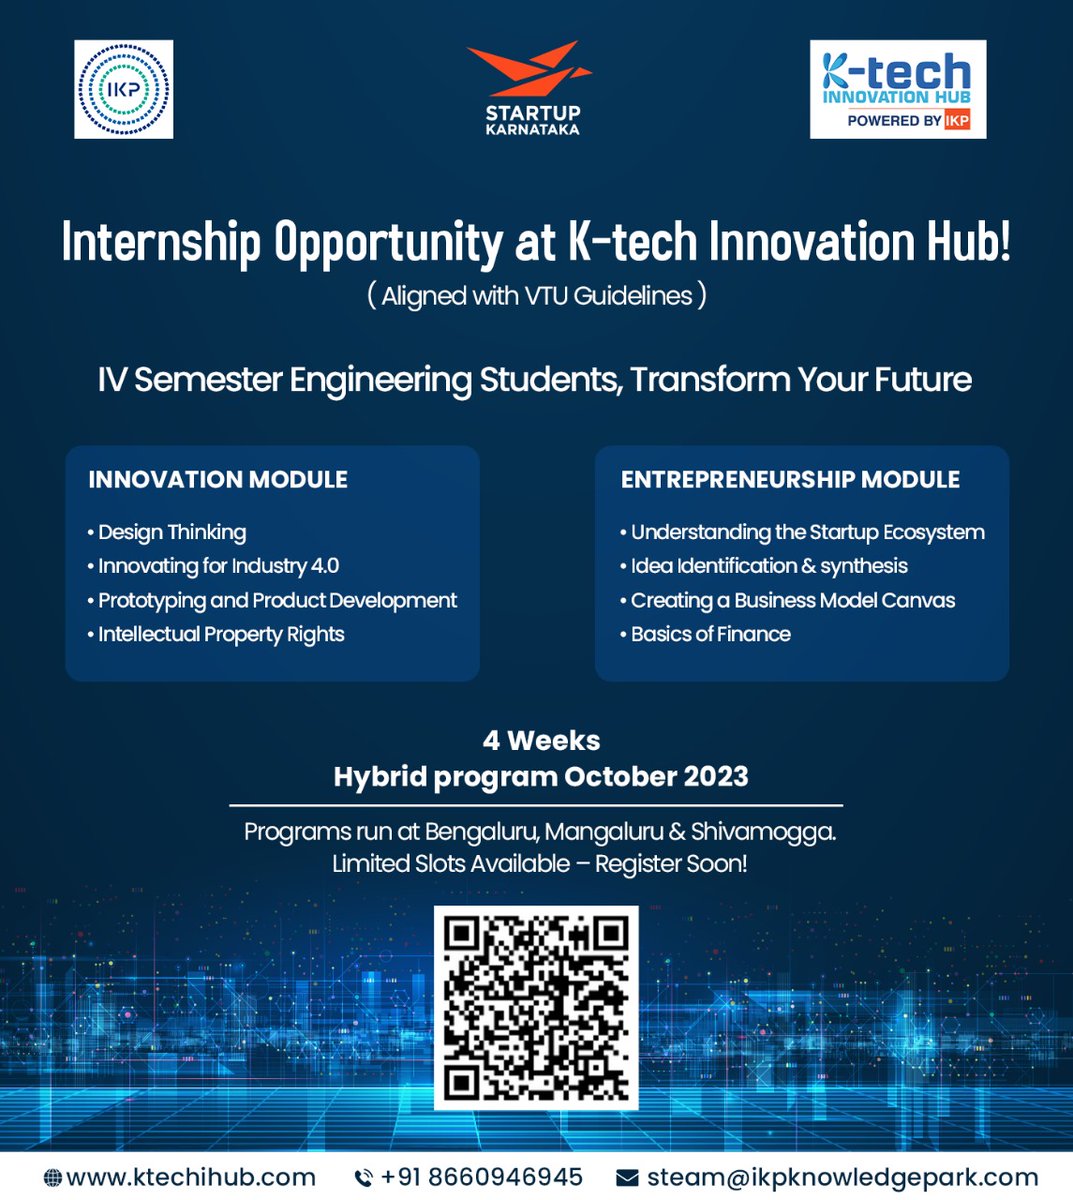 Internship Opportunity at @Ktechih , powered by @IKP_SciencePark . Aligned with VTU guidelines, @Ktechih is offering a transformative 4-week hybrid program in Bengaluru, Mangaluru, and Shivamogga. Limited slots available – 📞+91-8660946945 #innovation #internshipopportunity